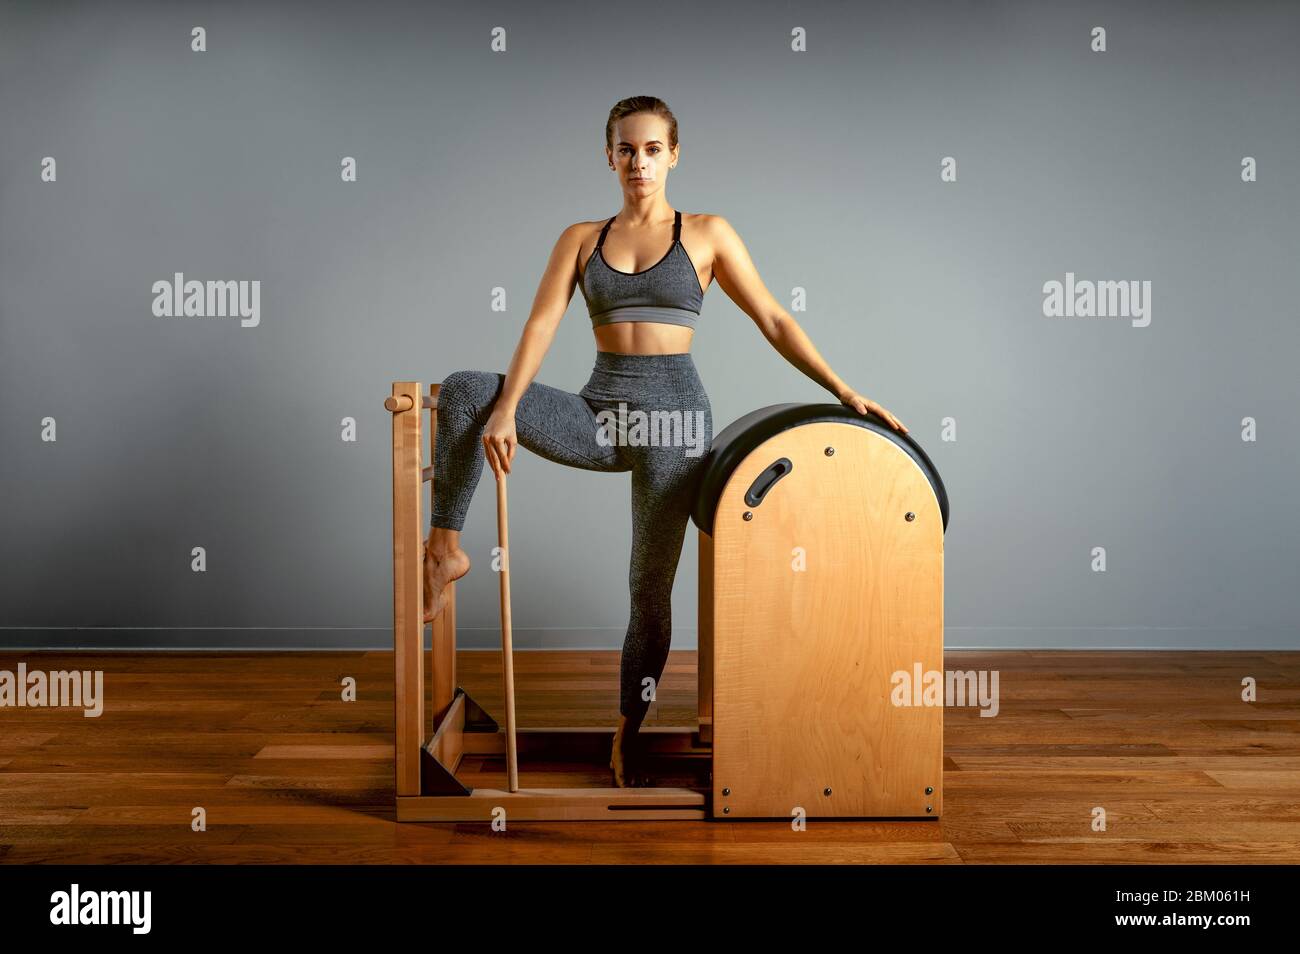 https://c8.alamy.com/comp/2BM061H/pilates-trainer-exercises-on-a-pilates-barrel-body-training-perfect-body-shape-and-posture-correction-opporno-motor-apparatus-copy-space-2BM061H.jpg